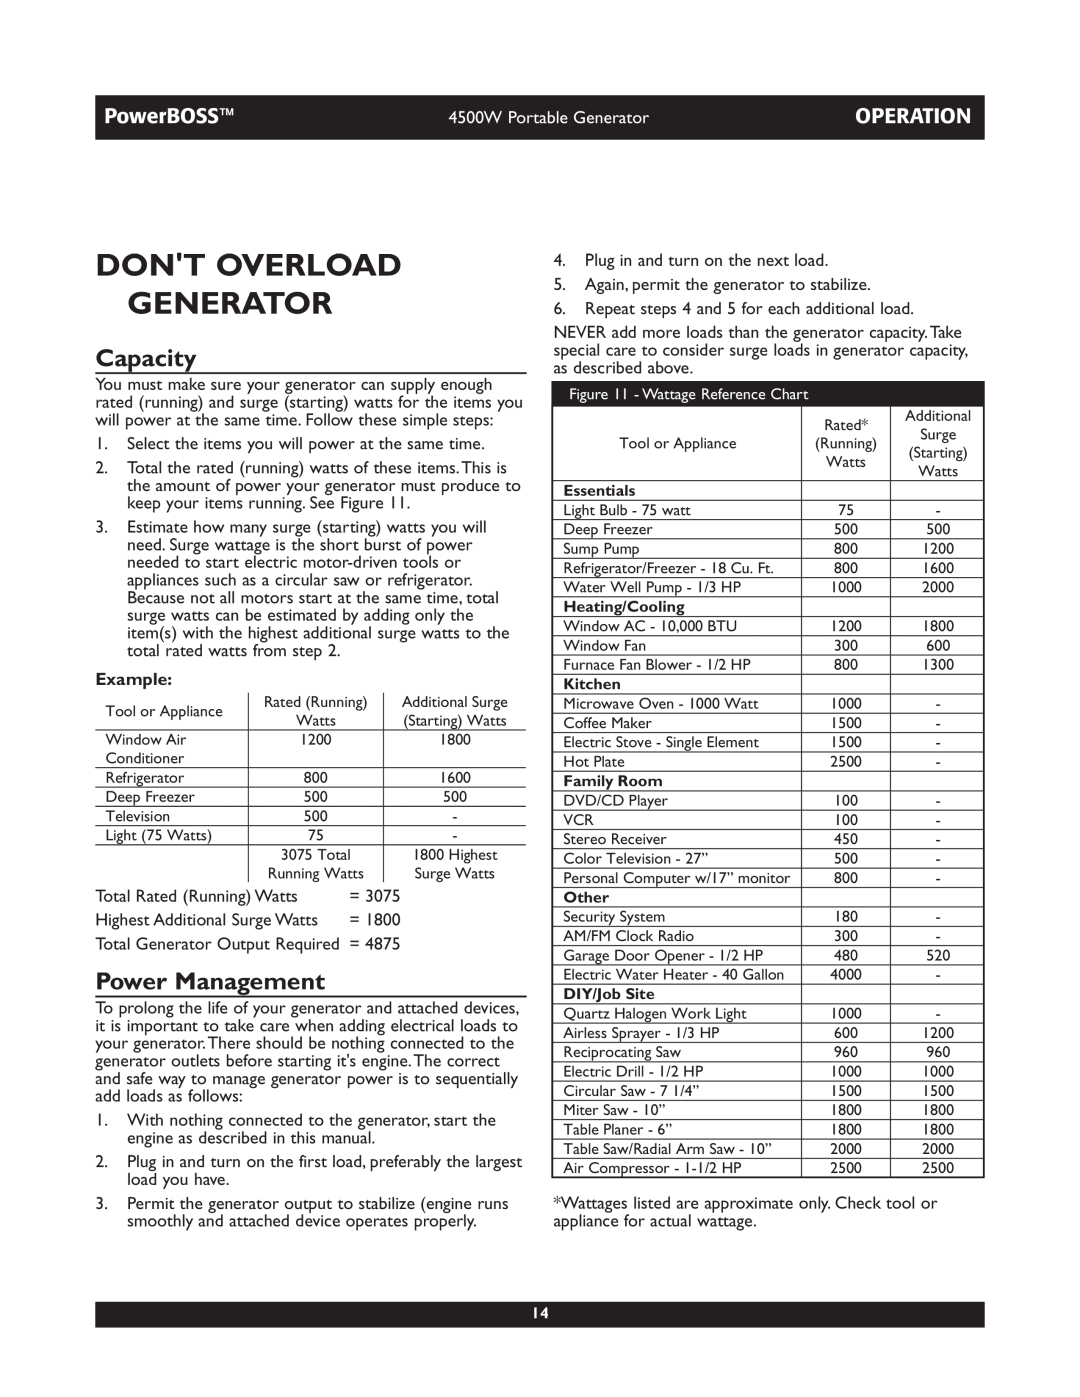 Briggs & Stratton 01648-1 operating instructions Dont Overload Generator, Capacity, Power Management, PowerBOSS, Operation 